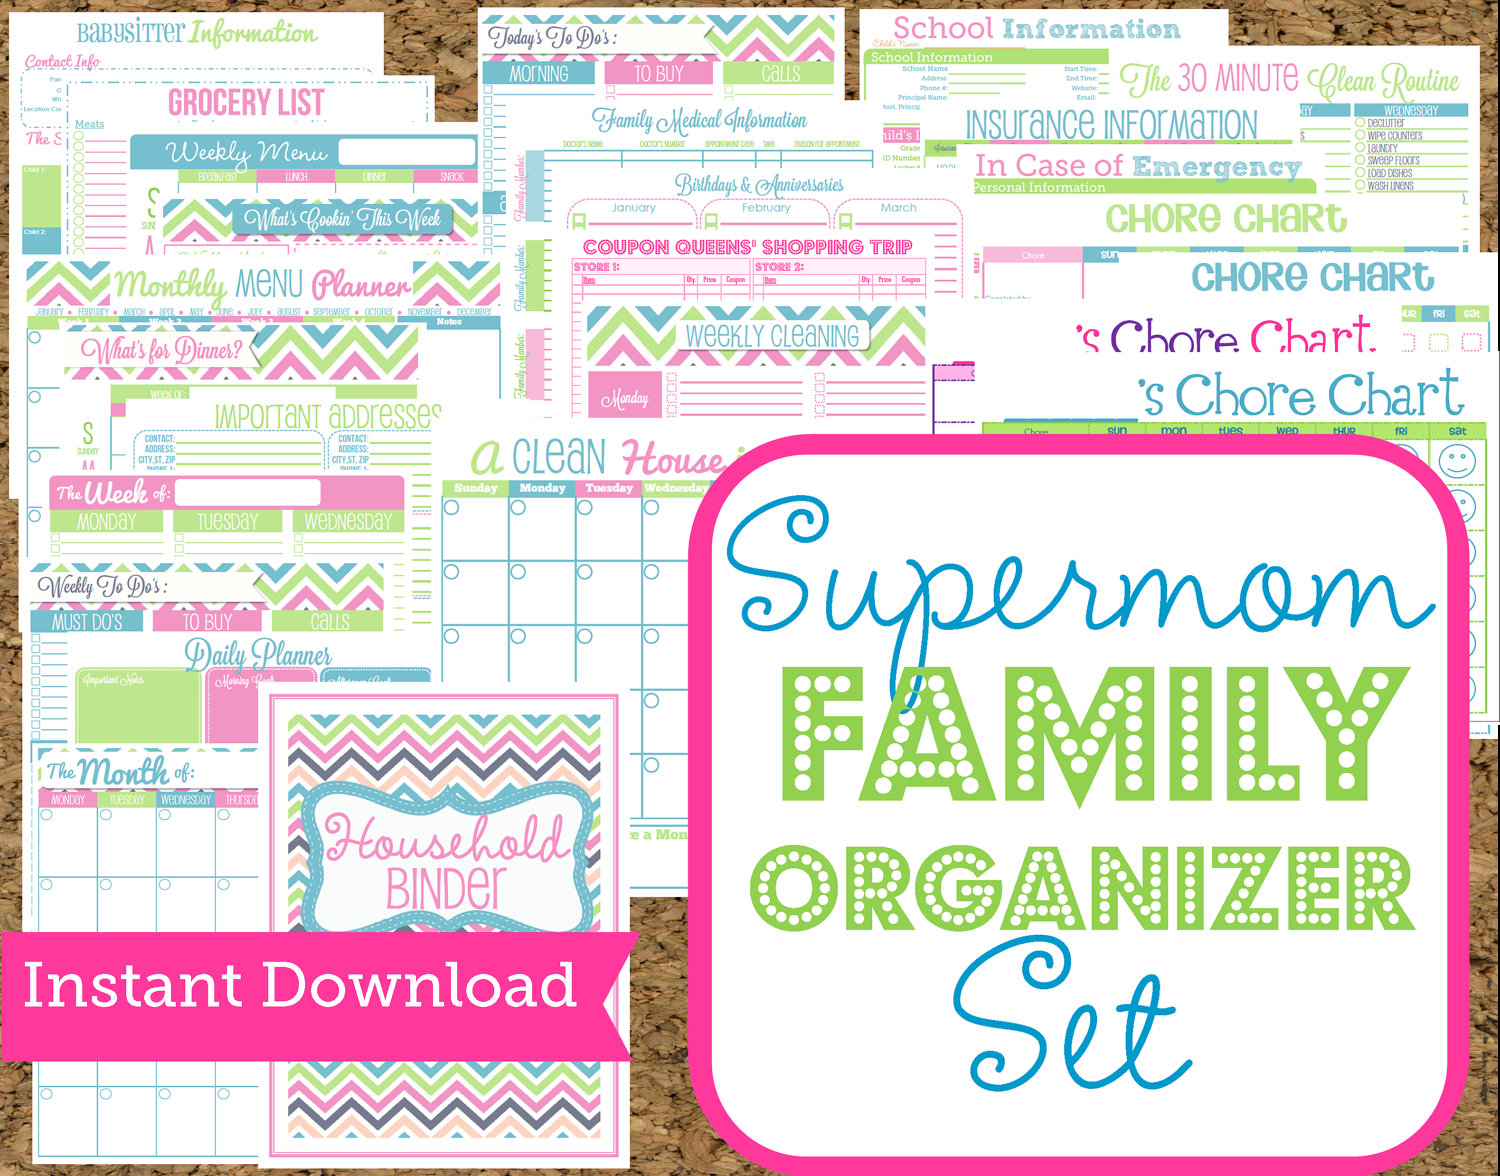 8-best-images-of-mom-free-planner-printables-mom-planner-free-printables-mom-planner